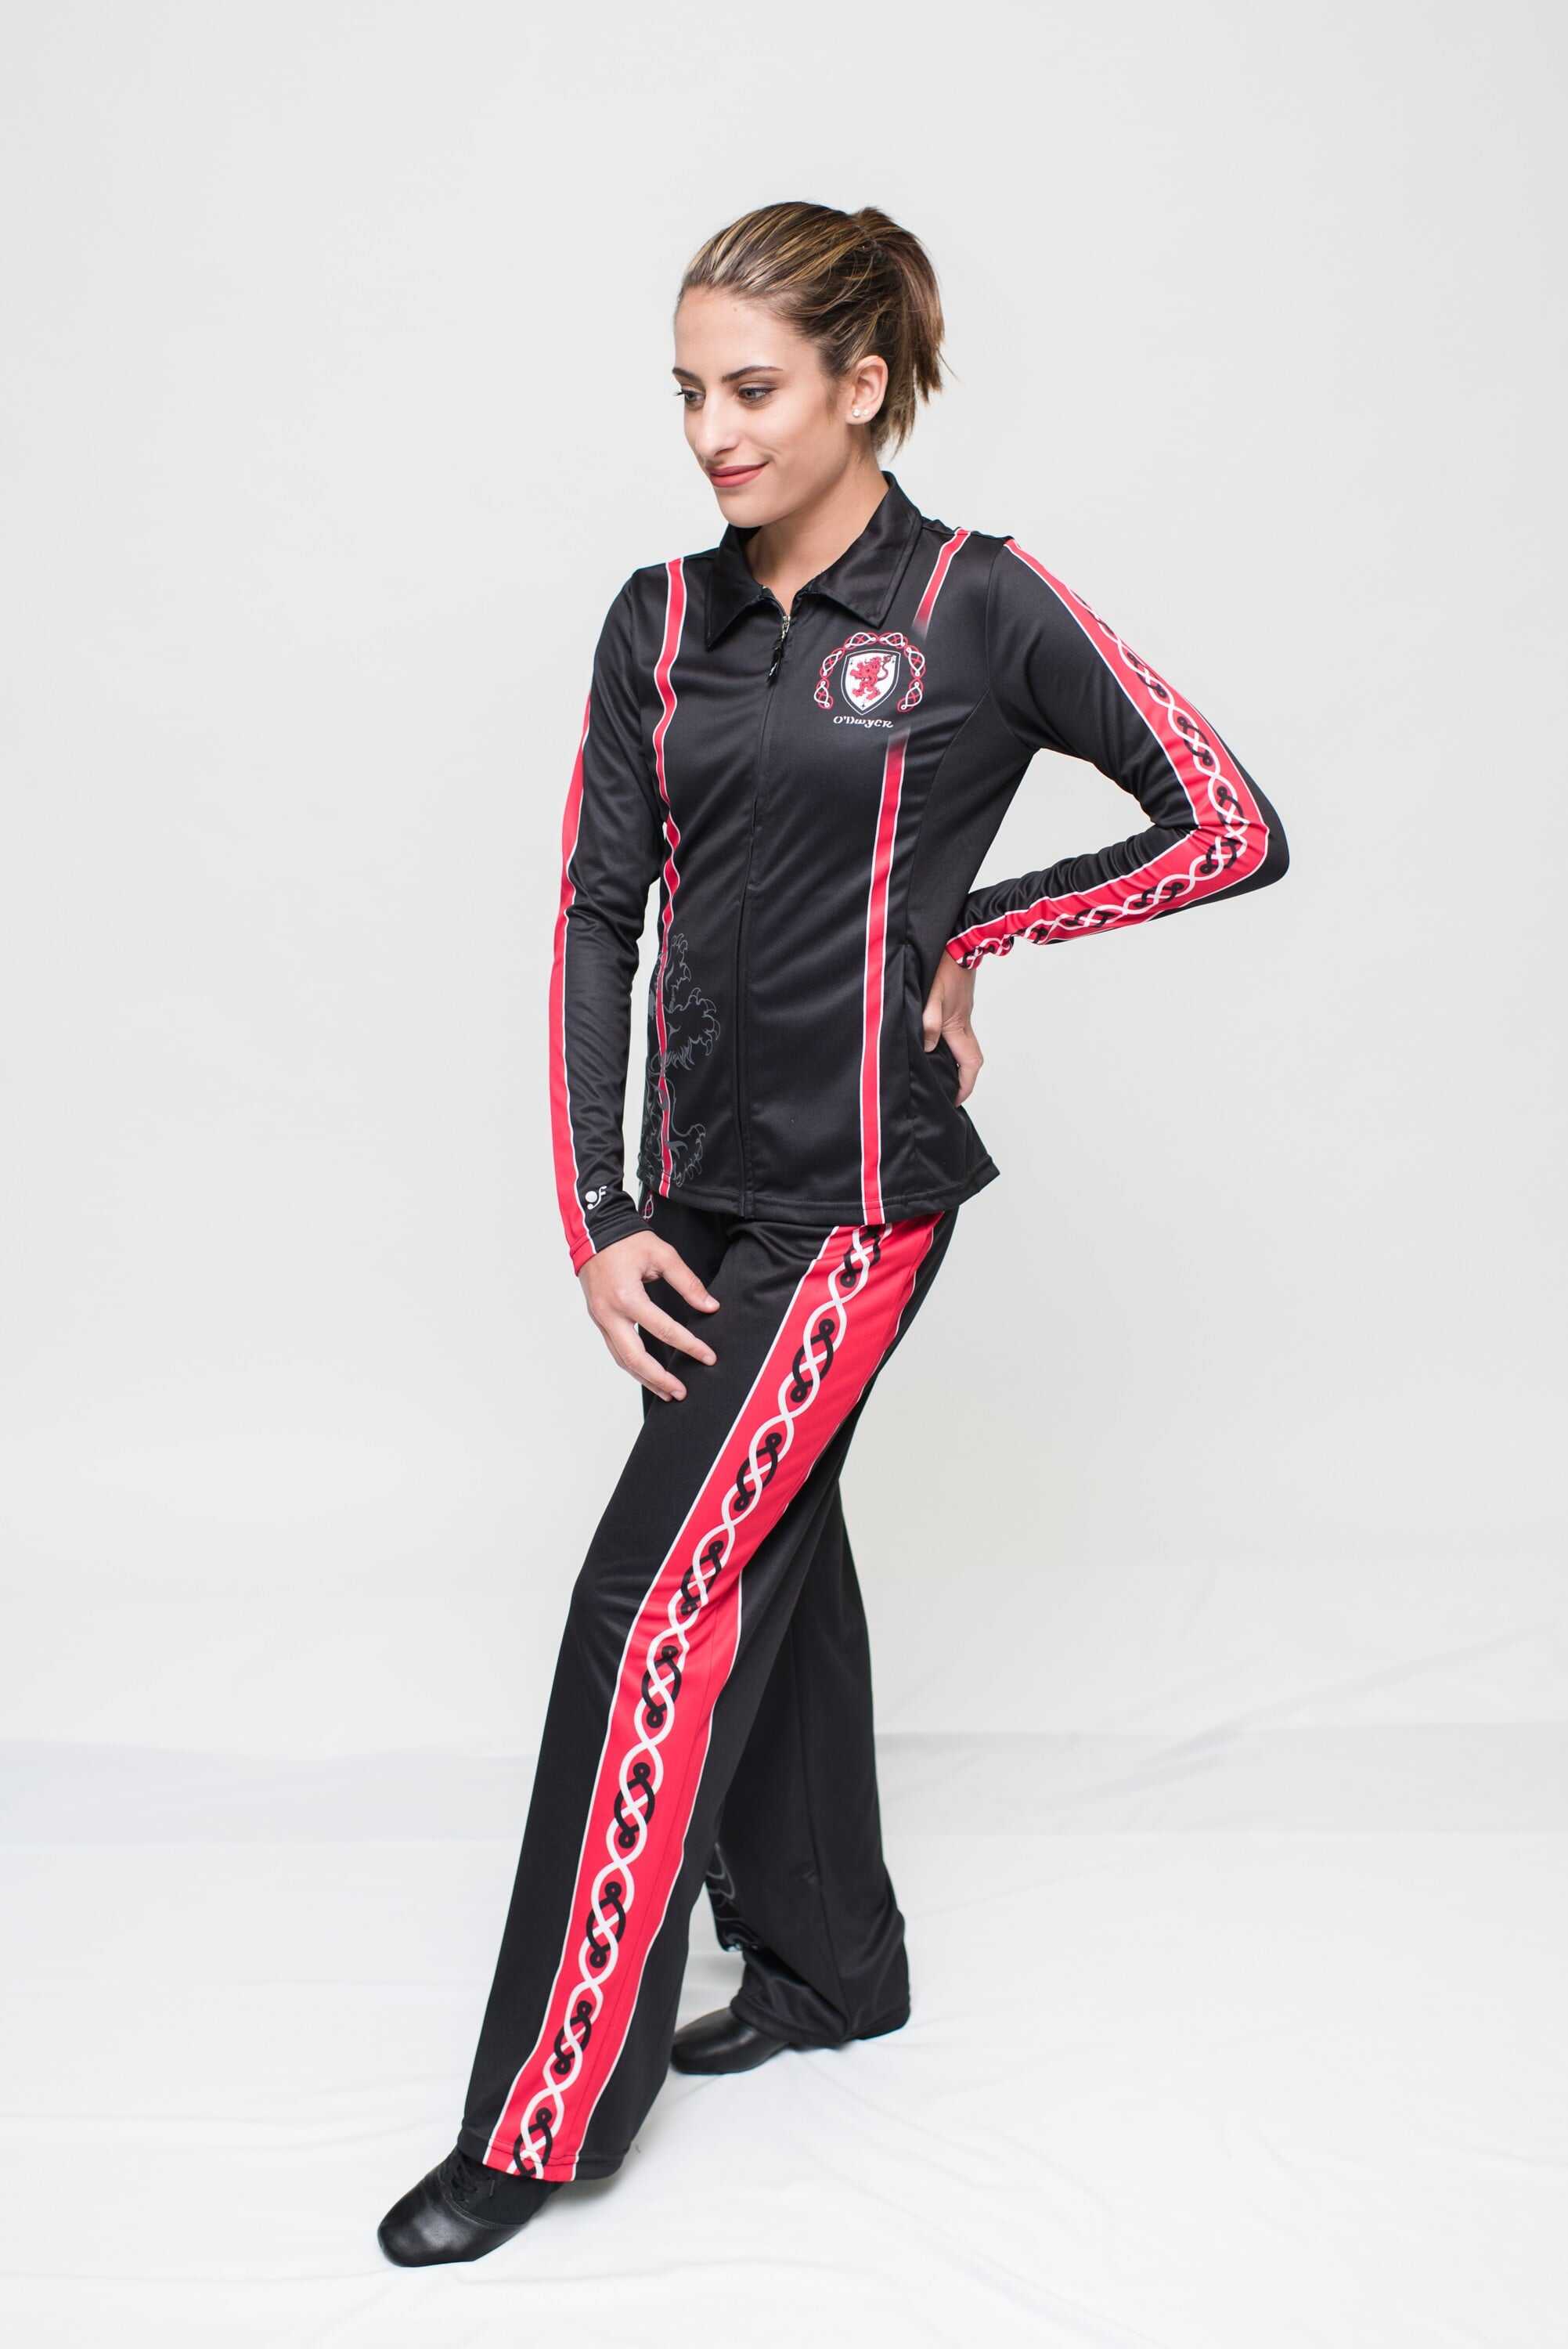 For Game Day don't be left out.  CREATE your Sublimation Apparel and be a true field stand-out